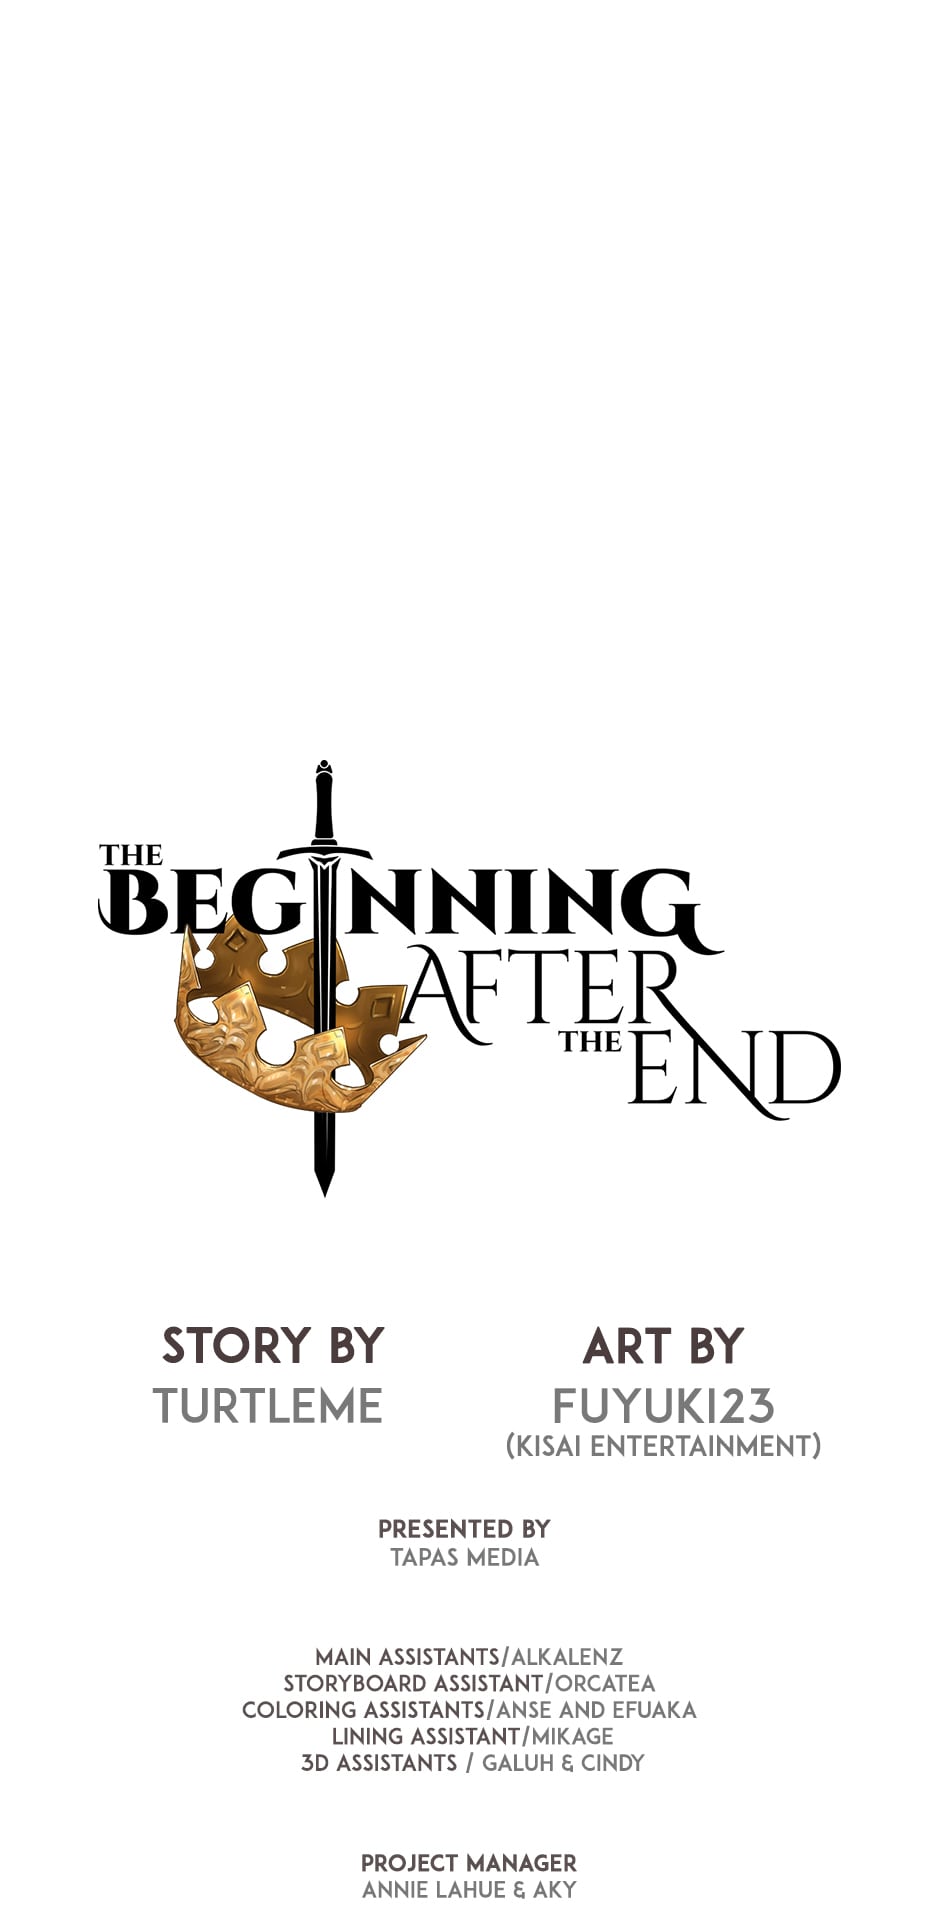 The Beginning After the End image